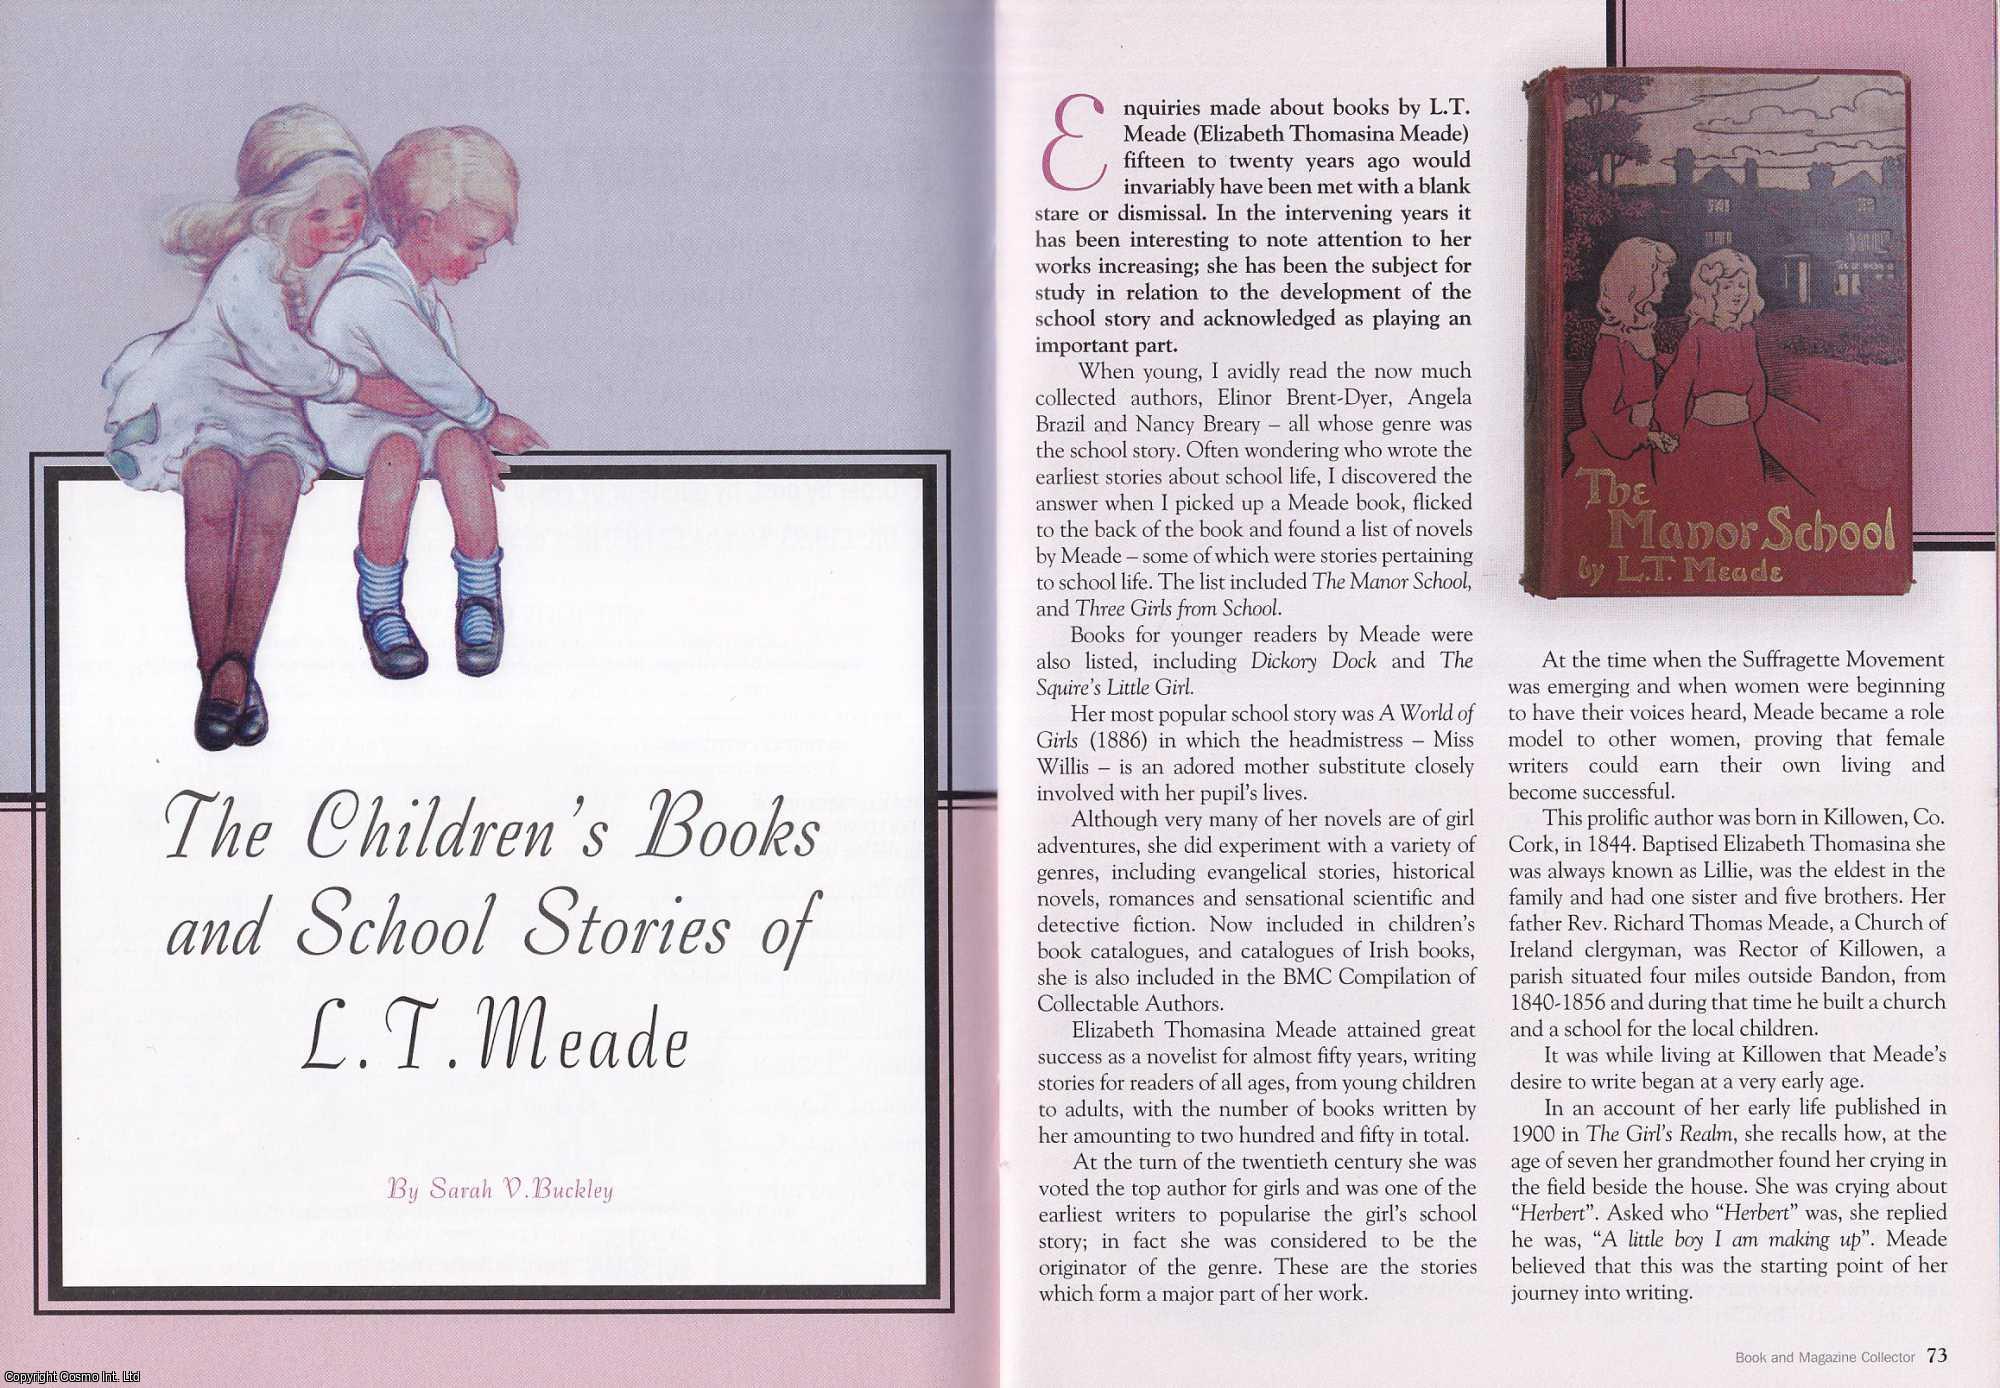 Sarah V. Buckley - The Children's Books and School Stories of L. T. Meade. This is an original article separated from an issue of The Book & Magazine Collector publication.